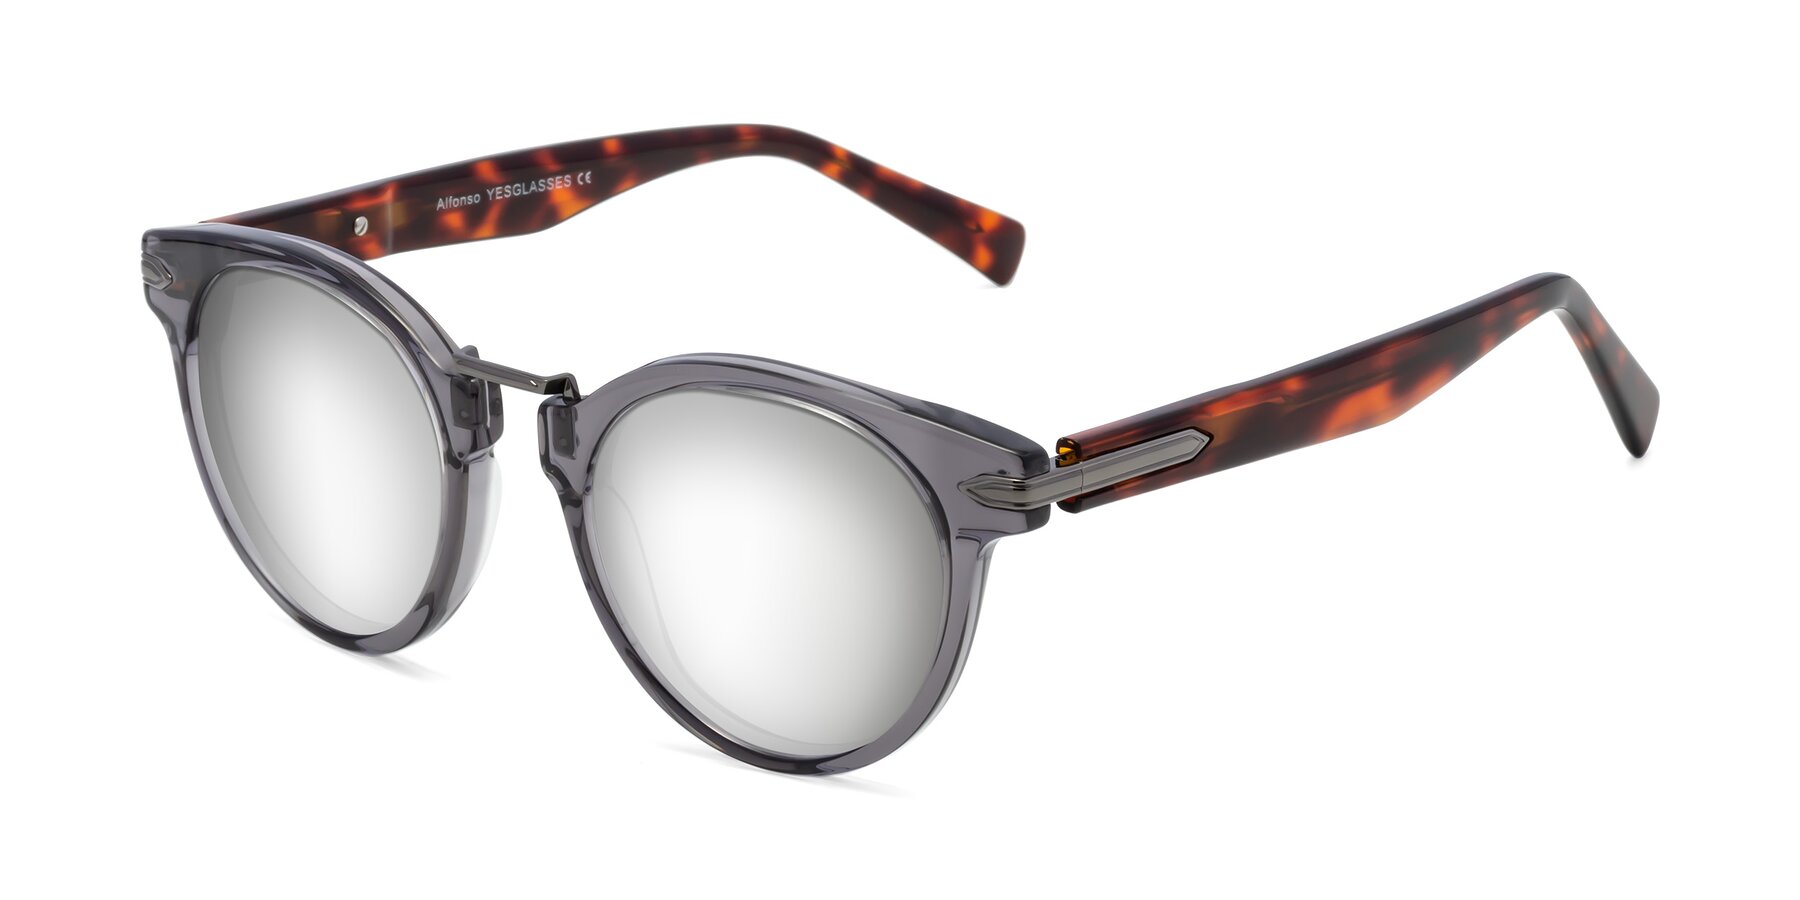 Angle of Alfonso in Gray /Tortoise with Silver Mirrored Lenses